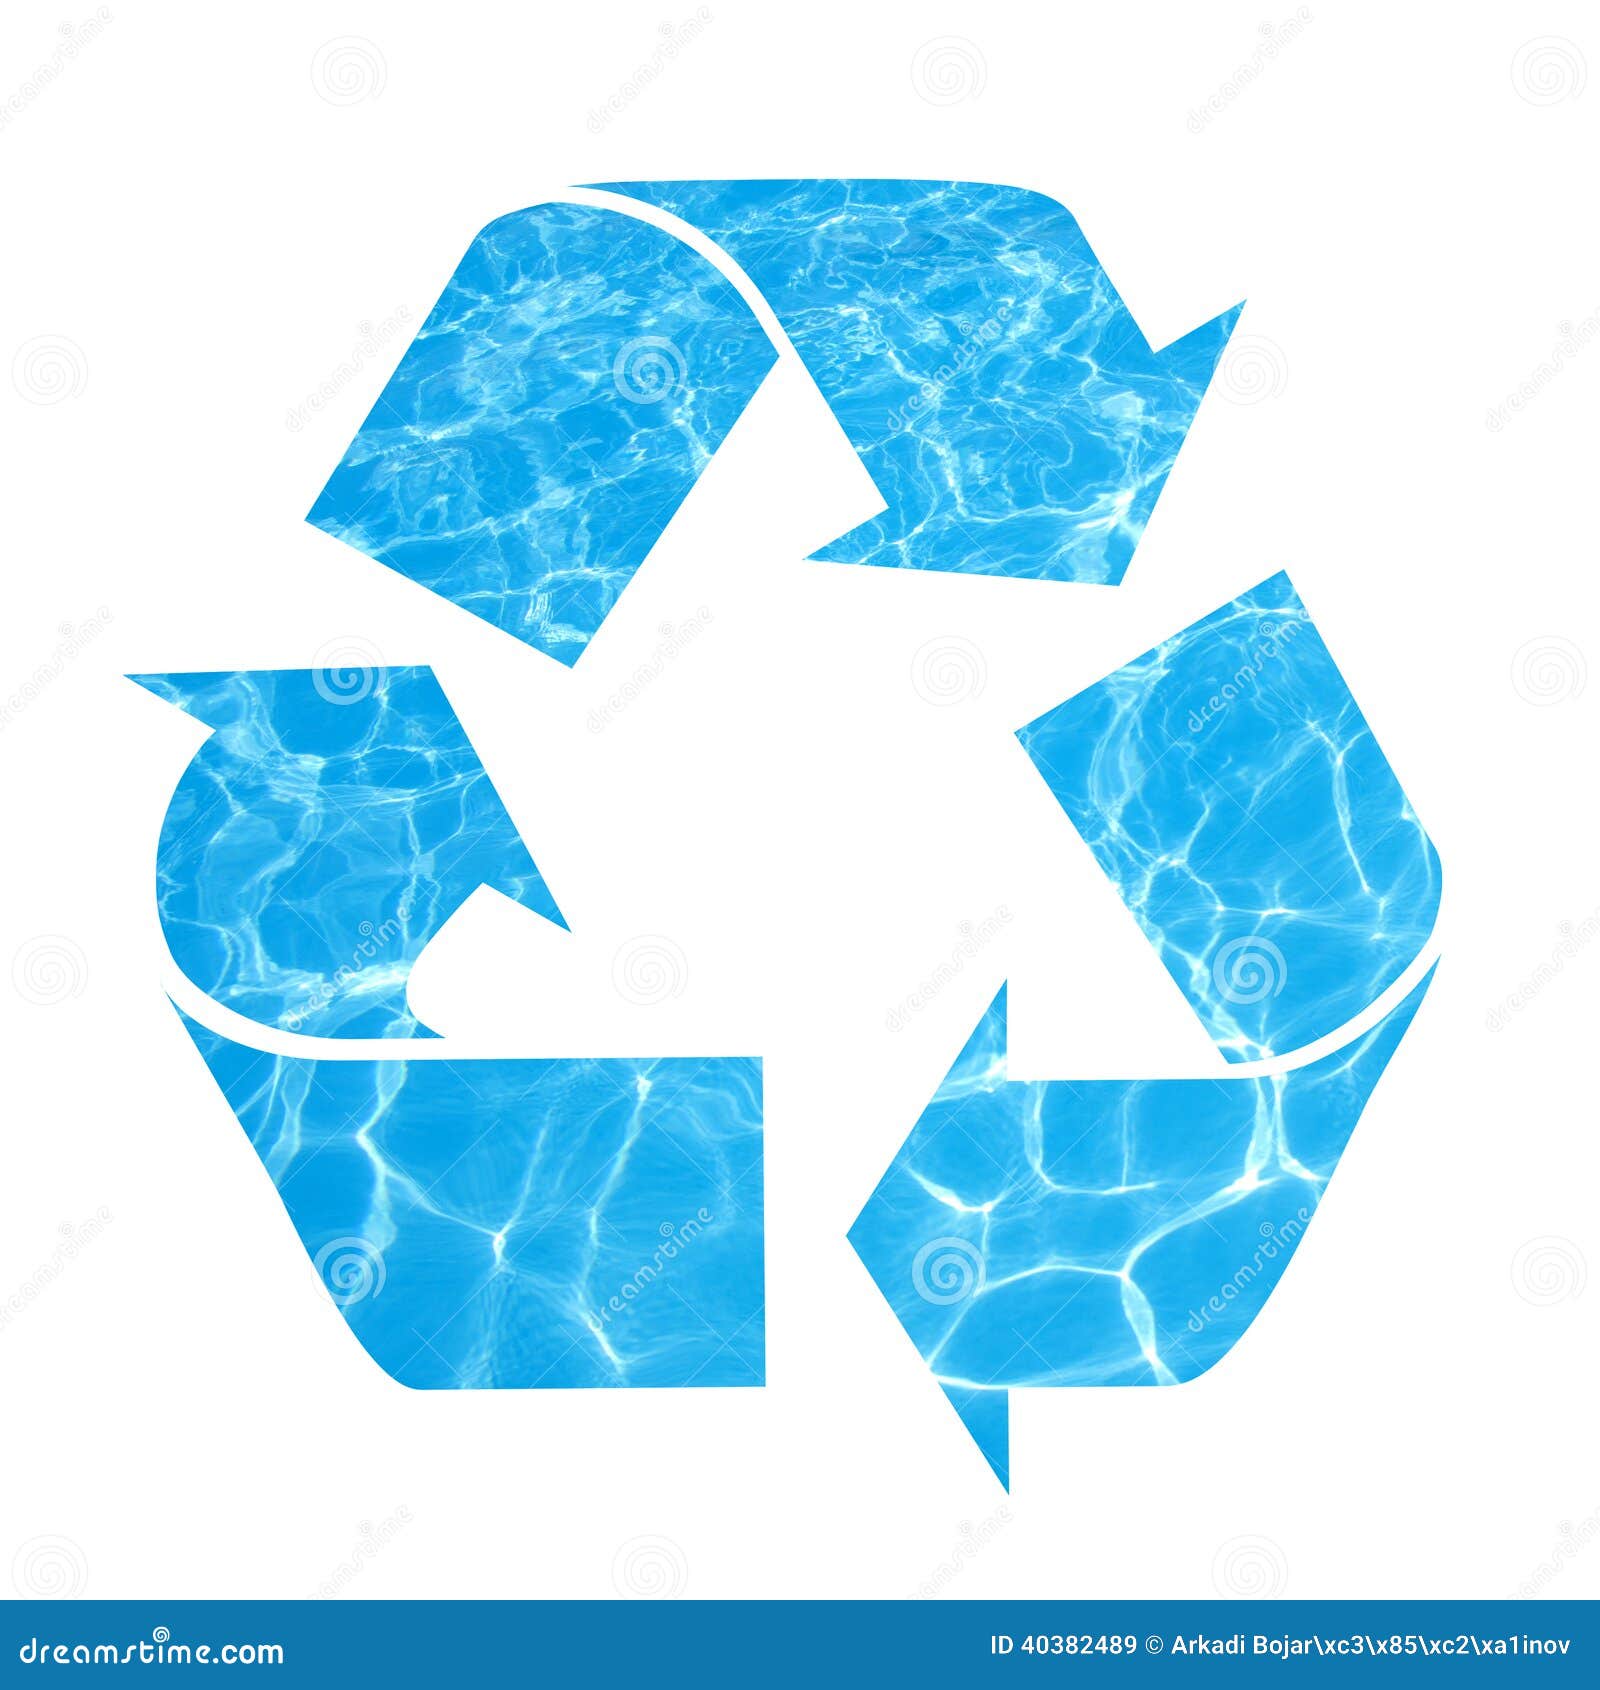 wastewater recycling and reuse pdf